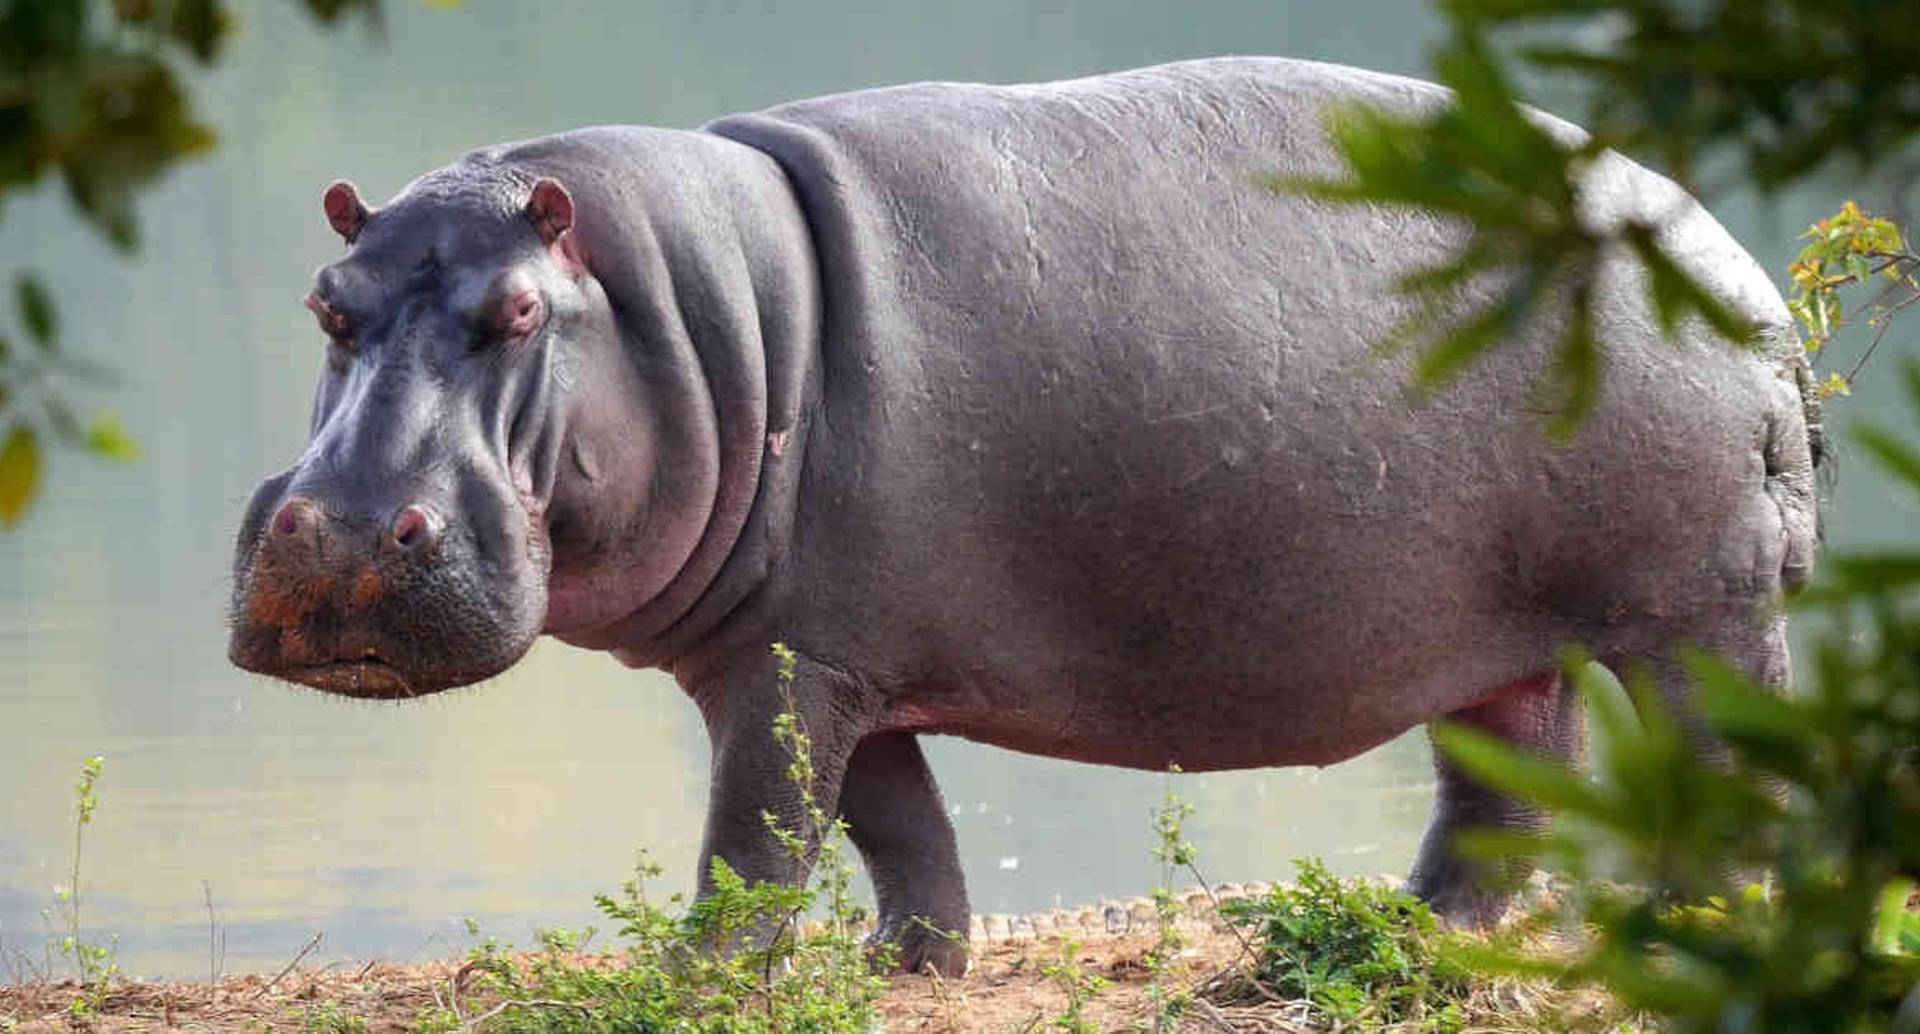 is concern that this will affect the region’s fishing industry. In Africa, hippos act as ecosystem engineers, transferring nutrients from land to lakes and sculpting new channels for water as they tread across dry earth. Some researchers have suggested they could provide a similar service in their new home